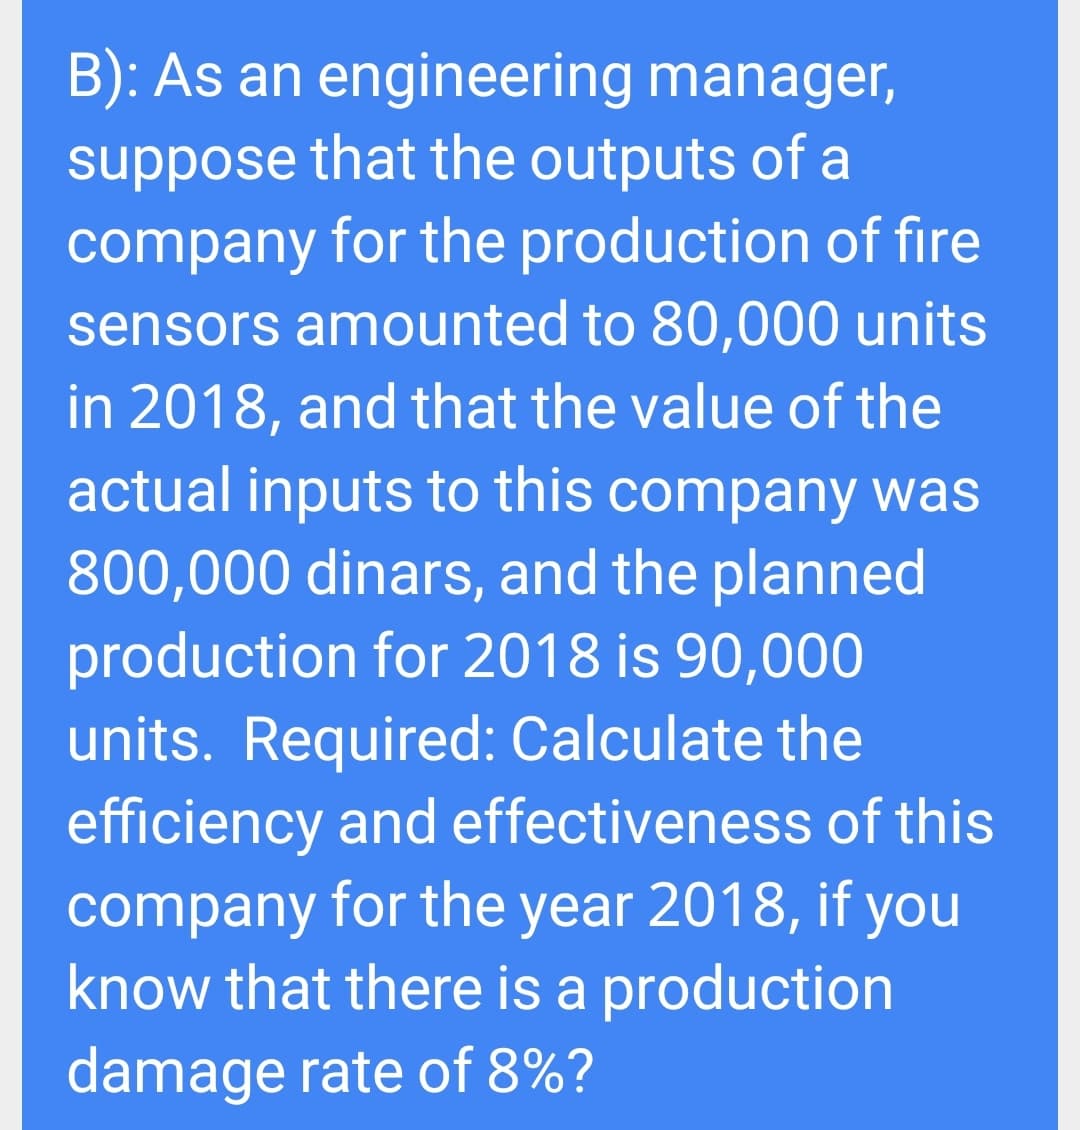 B): As an engineering manager,
suppose that the outputs of a
company for the production of fire
sensors amounted to 80,000 units
in 2018, and that the value of the
actual inputs to this company was
800,000 dinars, and the planned
production for 2018 is 90,000
units. Required: Calculate the
efficiency and effectiveness of this
company for the year 2018, if you
know that there is a production
damage rate of 8%?
